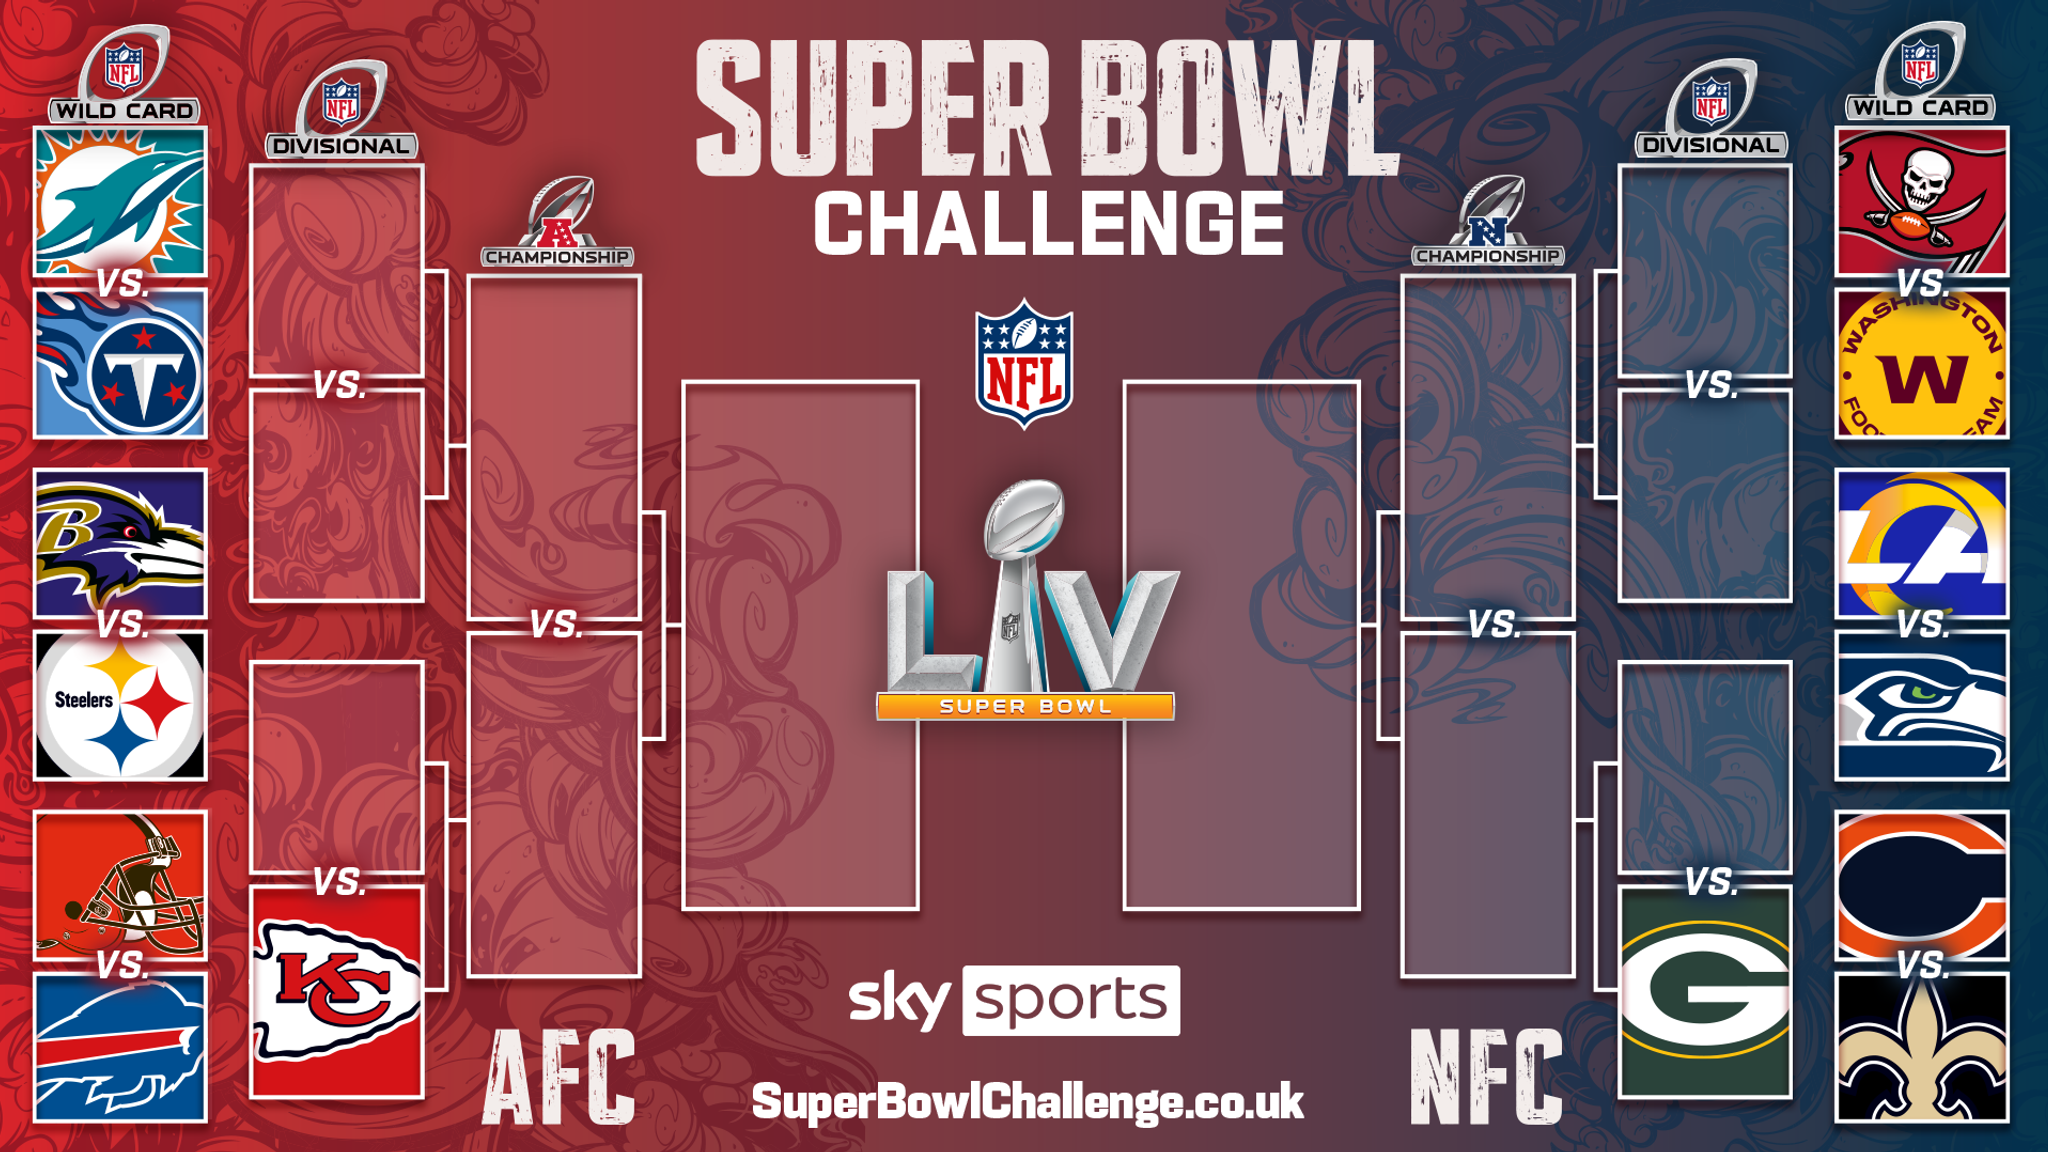 Super Bowl Tournament: A Big Game Bracket to Crown the Greatest